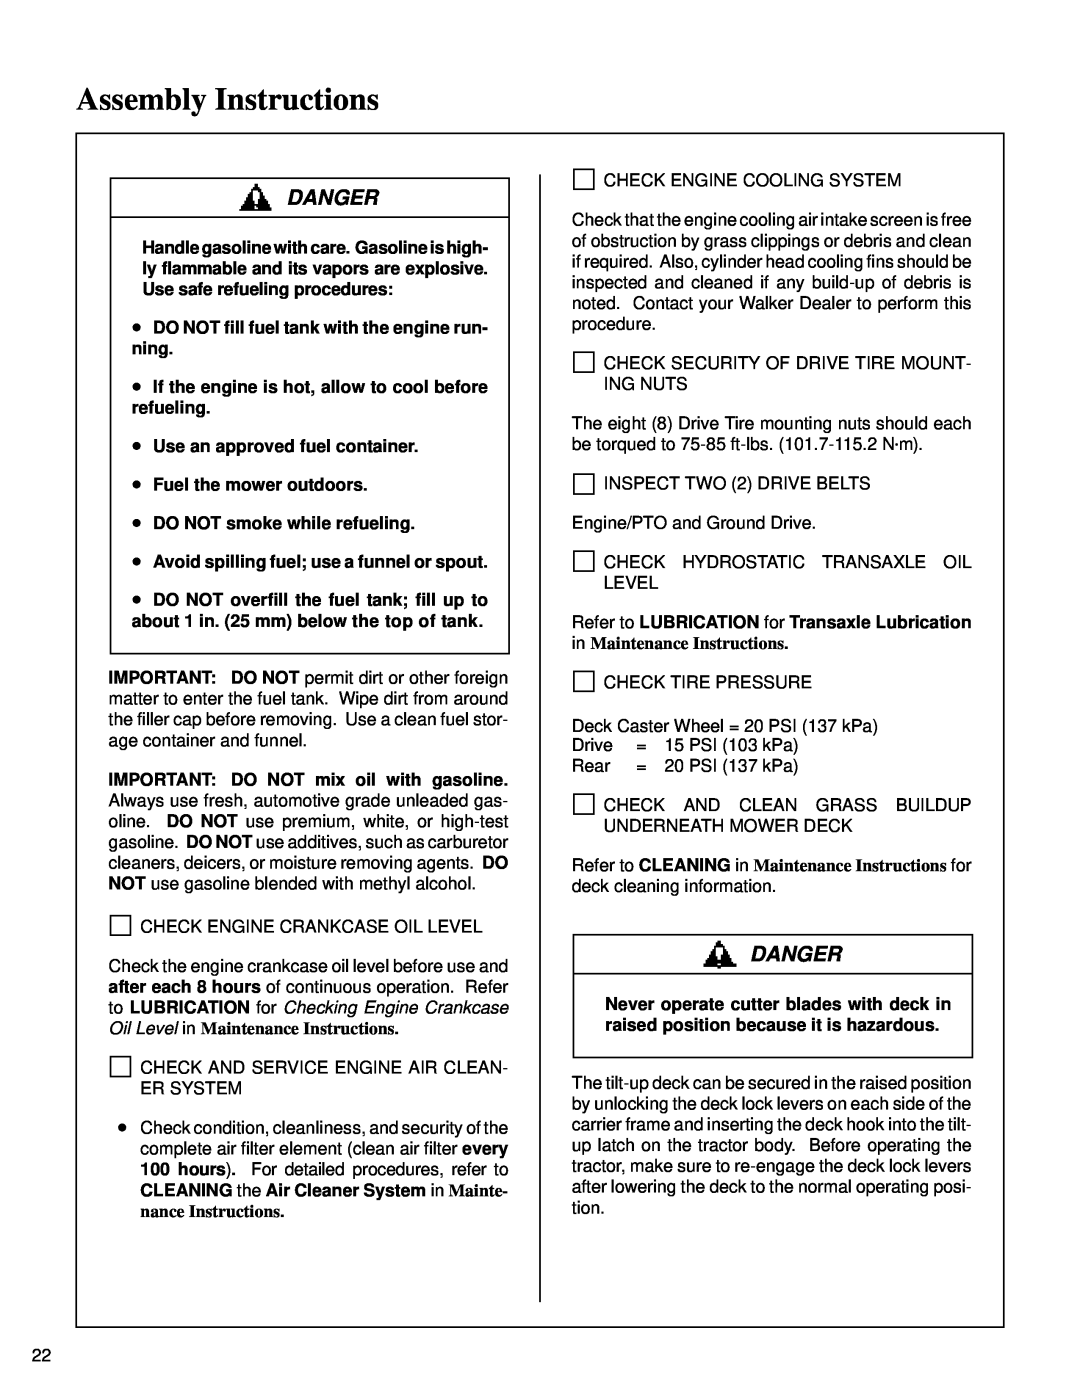 Briggs & Stratton MB (18 HP) owner manual Danger, Assembly Instructions, DO NOT fill fuel tank with the engine run- ning 